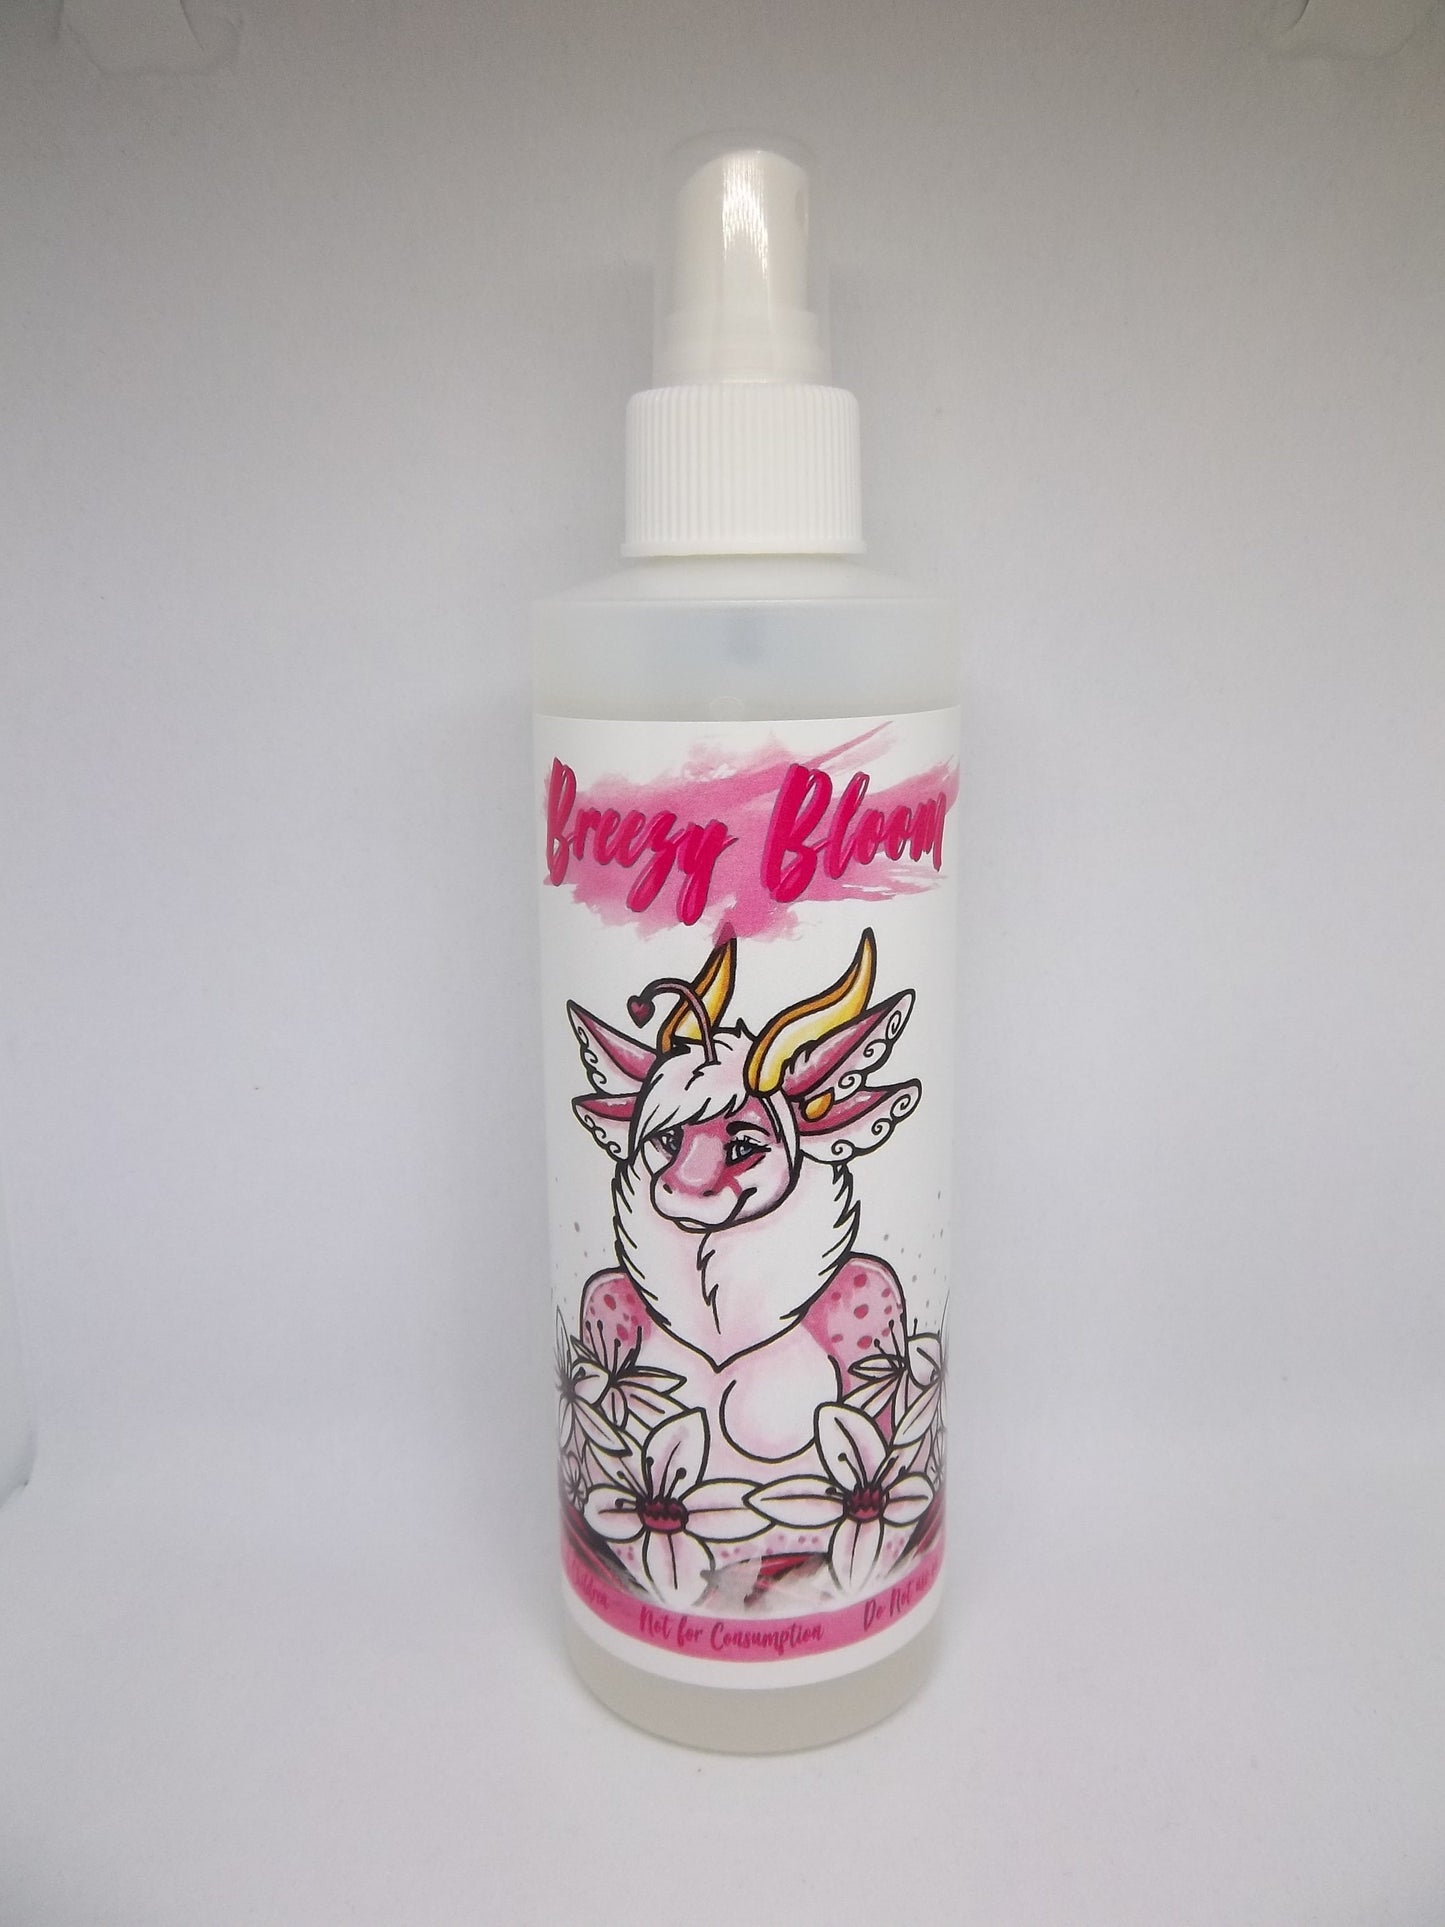 Fursuit Spray Cherry Blossom  Breezy Bloom Bottle Fragrance and Cleaner 8oz Essential Cleaning Costume Cleaner US Buyers Only